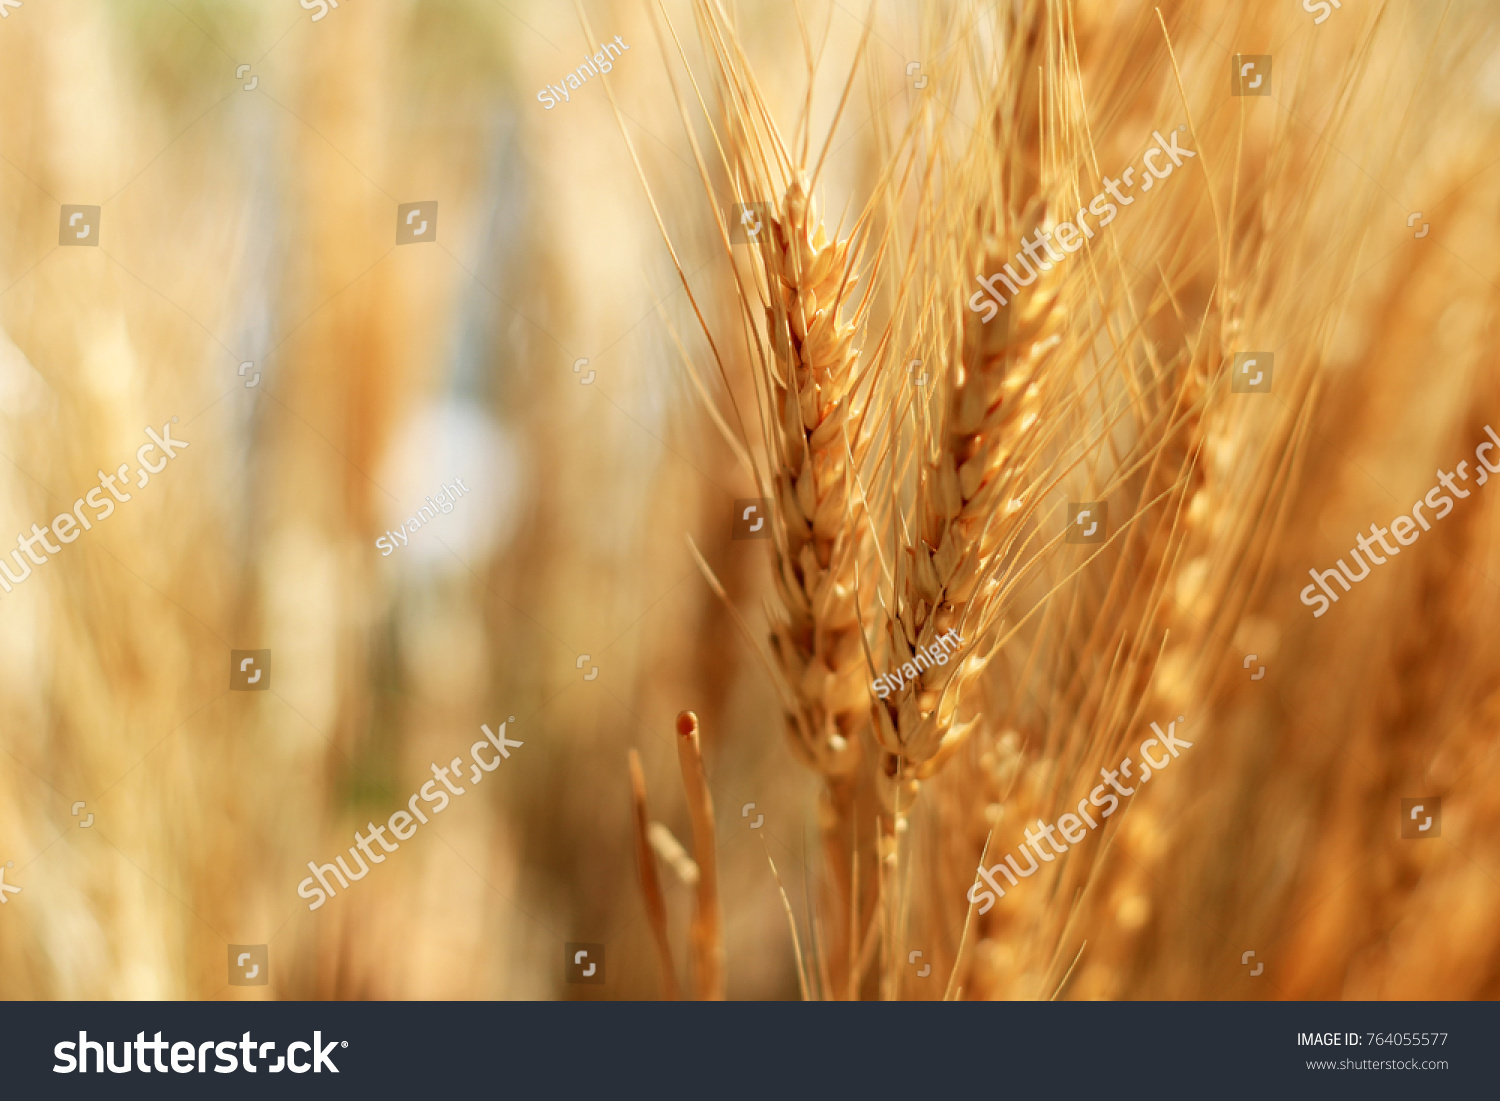 Close-up on golden wheat field or rice barley farming. Rye of barley plants harvest and agriculture background. #764055577